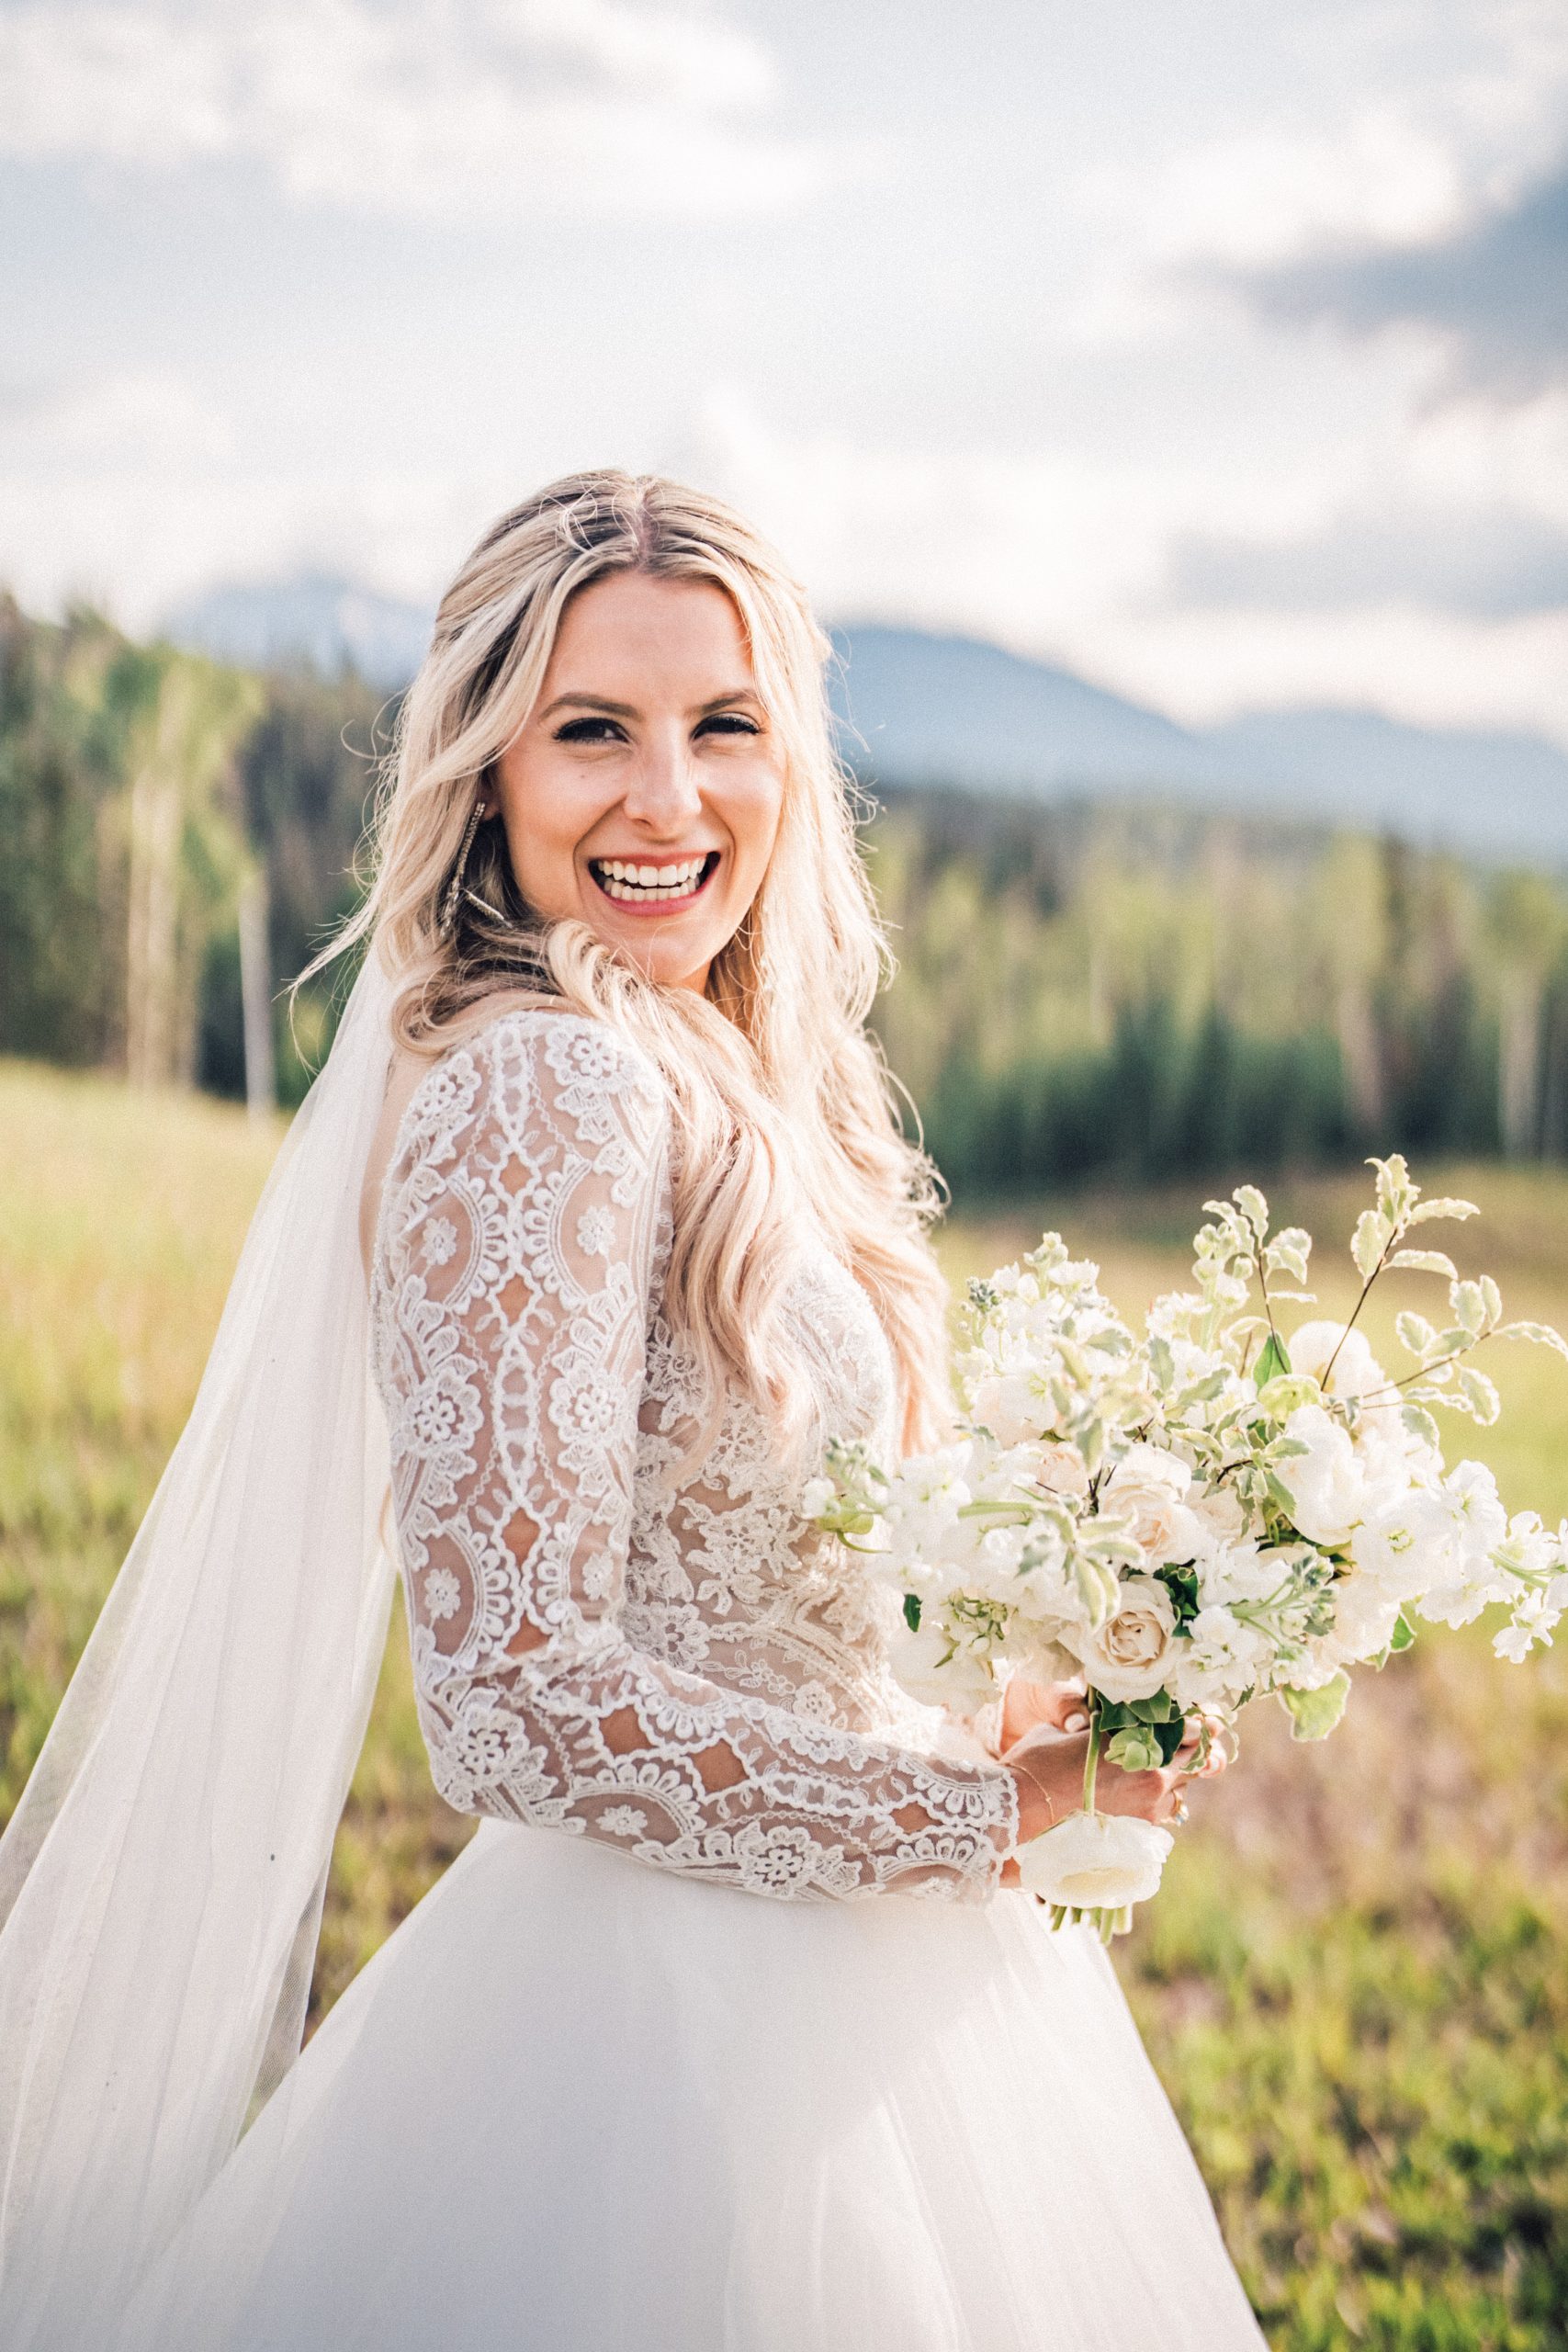 Bride In Ballgown Wedding Dress Called Mallory Dawn By Maggie Sottero